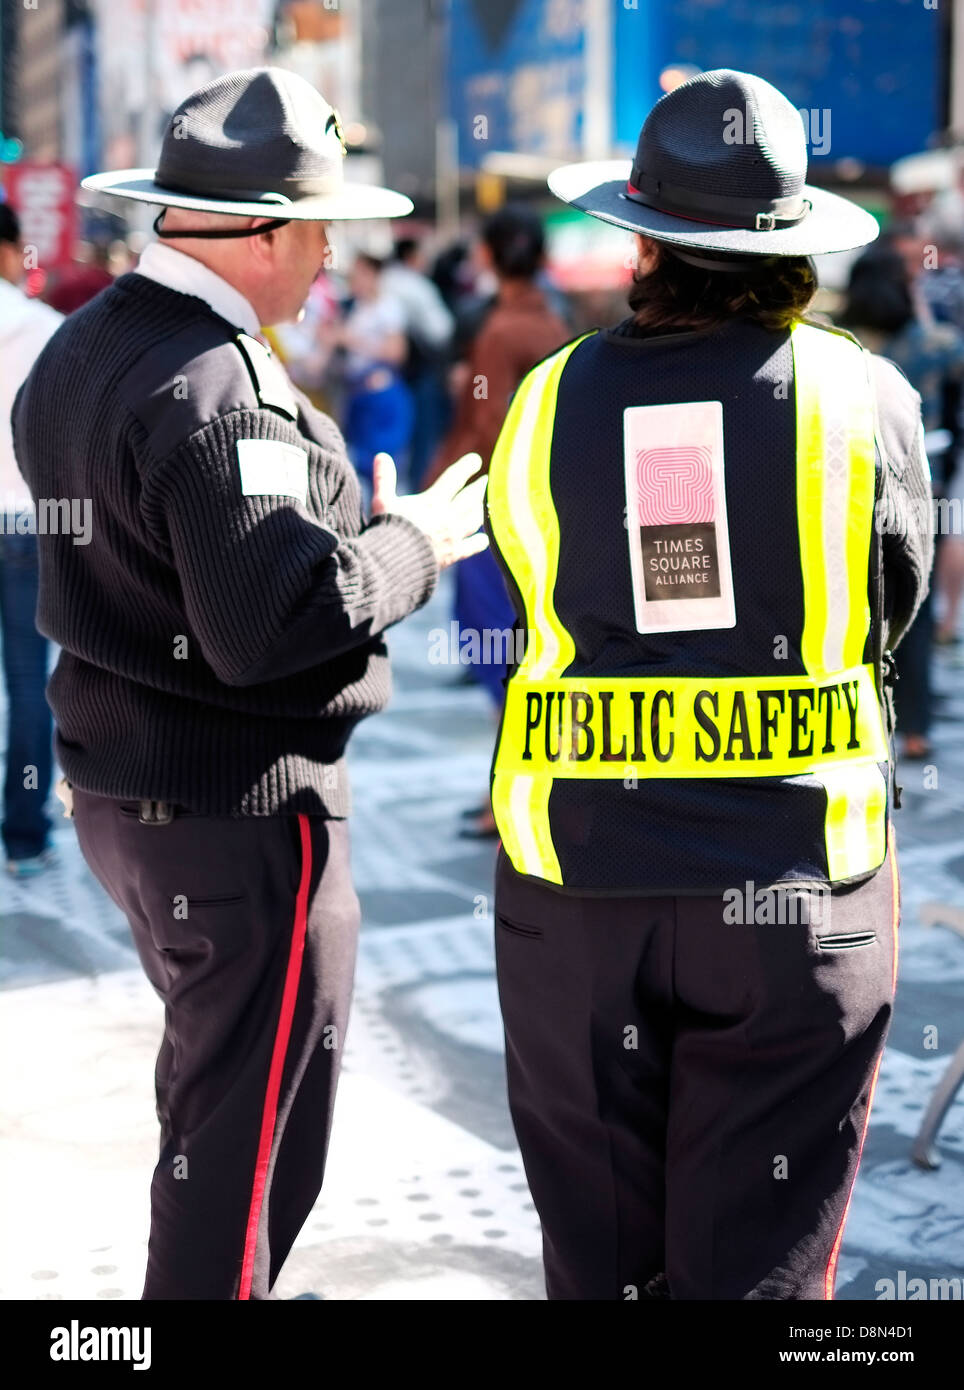 Public Safety officers standing in Times Square, New York City. Stock Photo